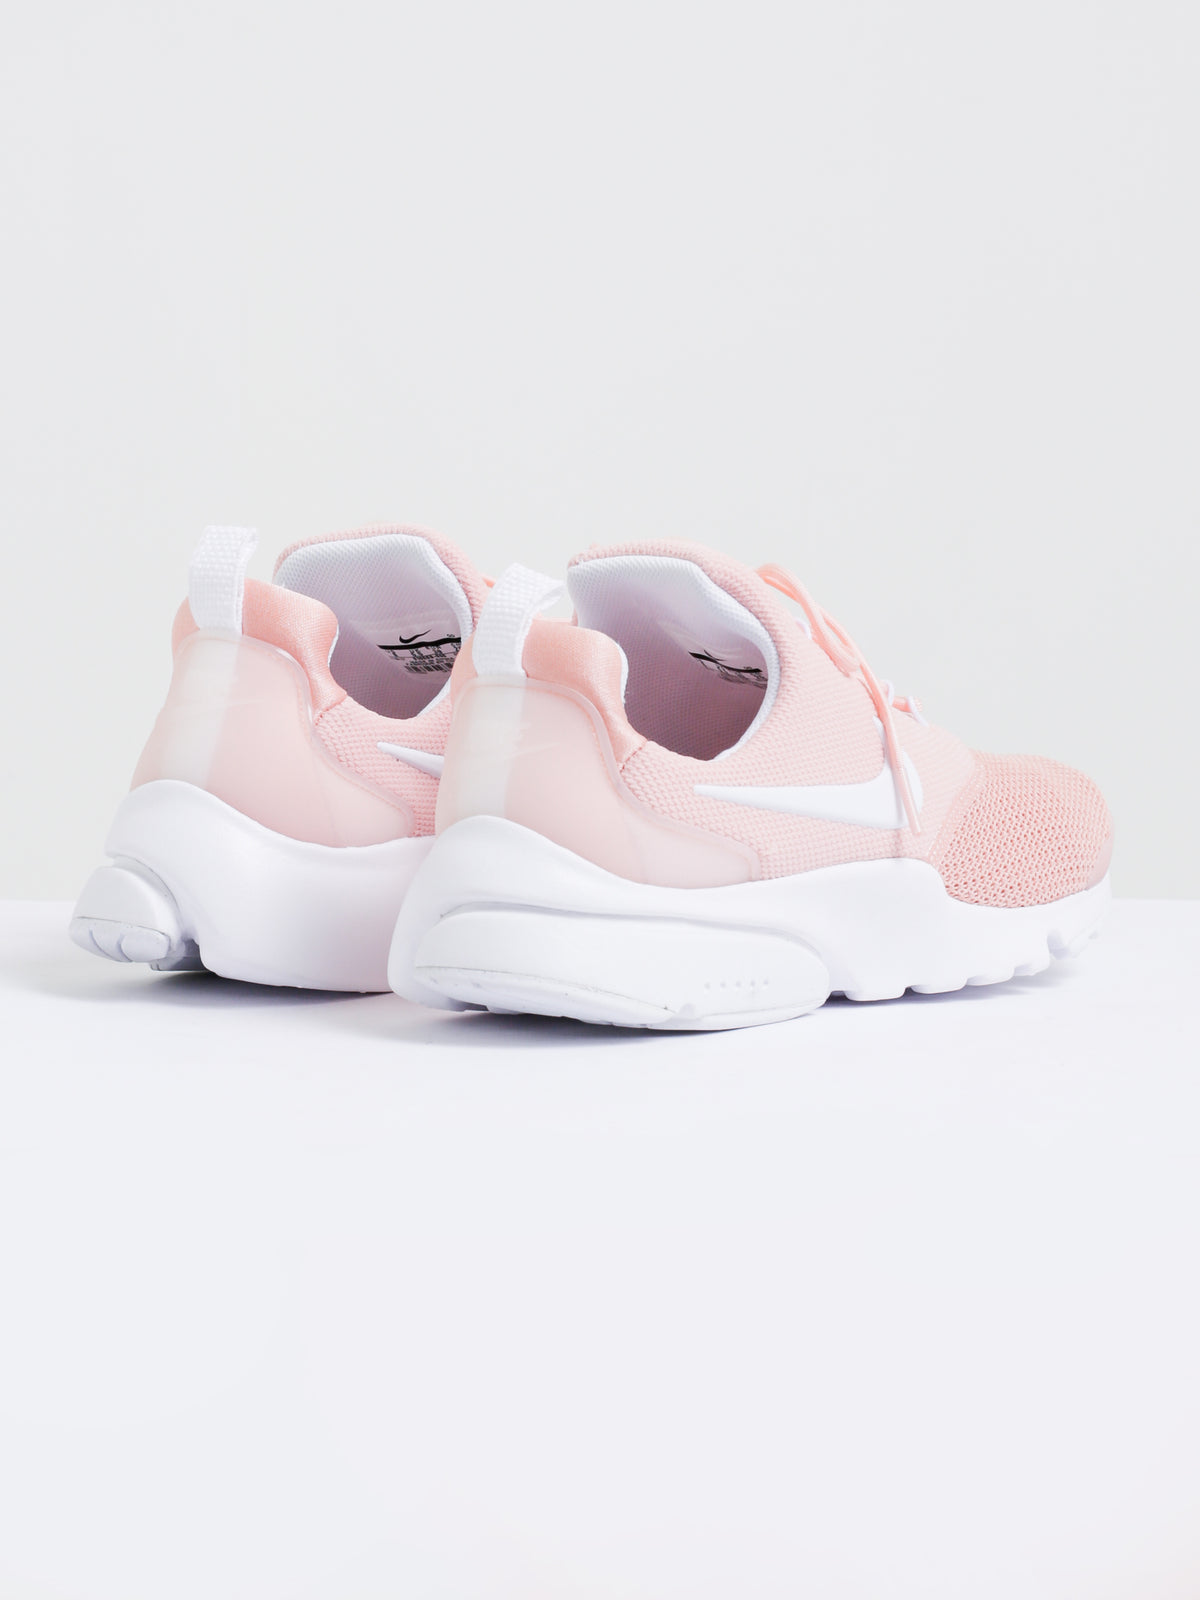 Womens Presto Fly Sneakers in Coral